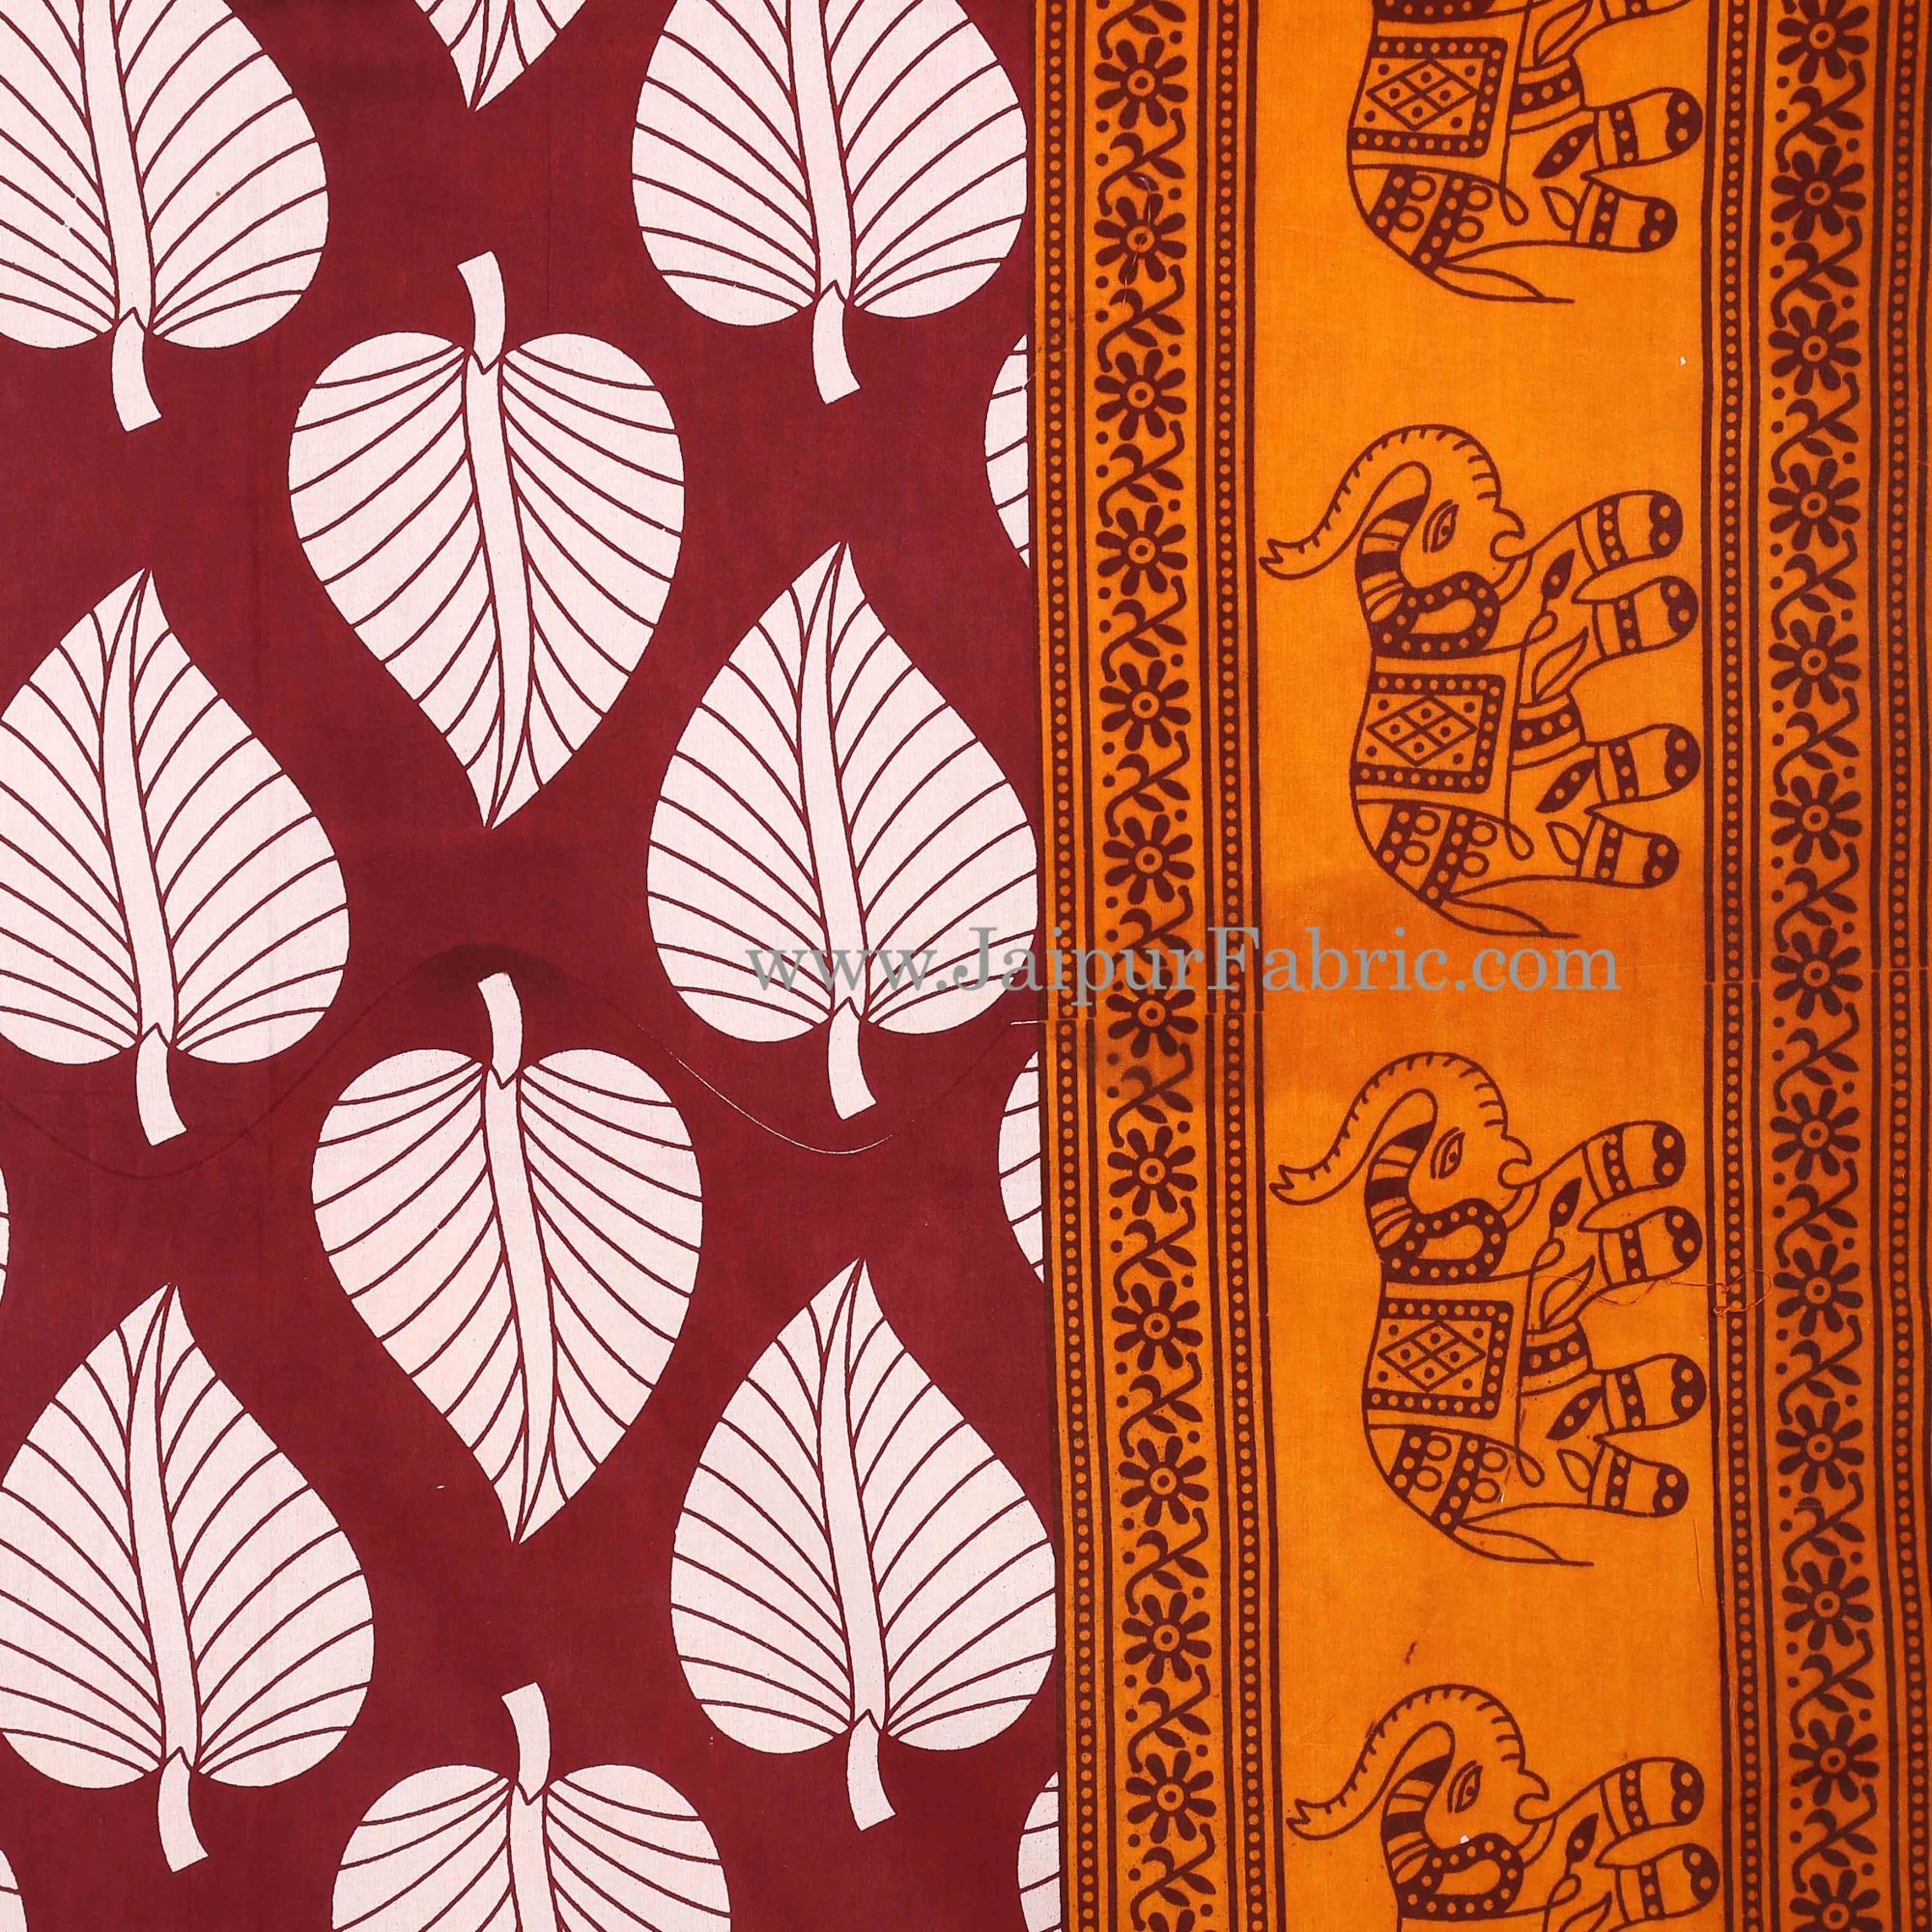 Yellow  Border With  Maroon  Paan Pattern Cotton Double Bed Sheet